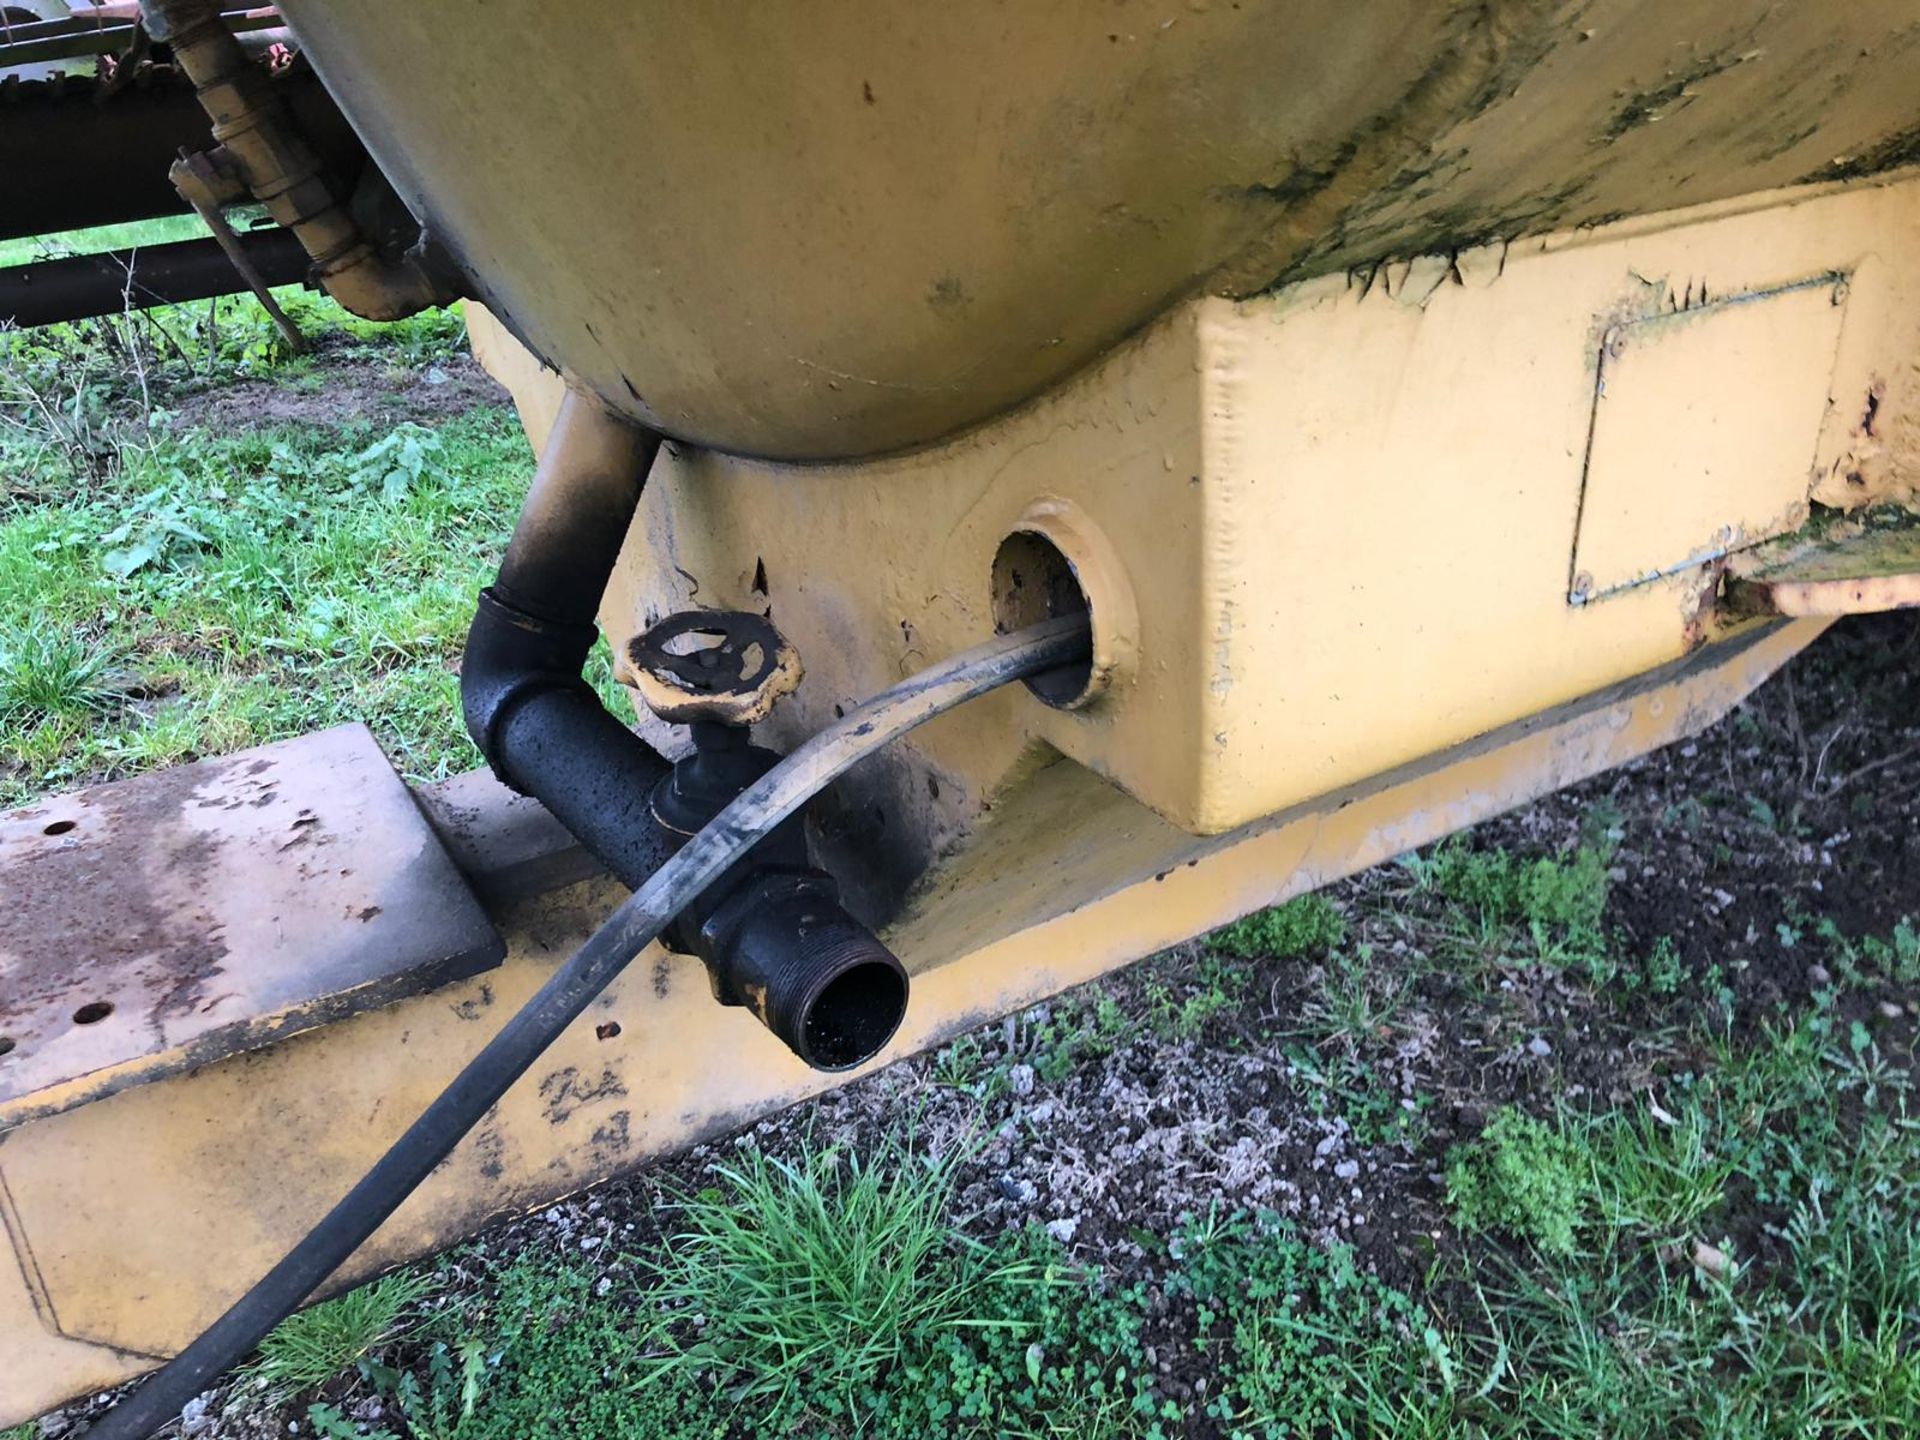 1989 TWIN AXLE TOW ABLE YELLOW OIL TANK, SERIAL NUMBER: VE 355 *PLUS VAT* - Image 3 of 10